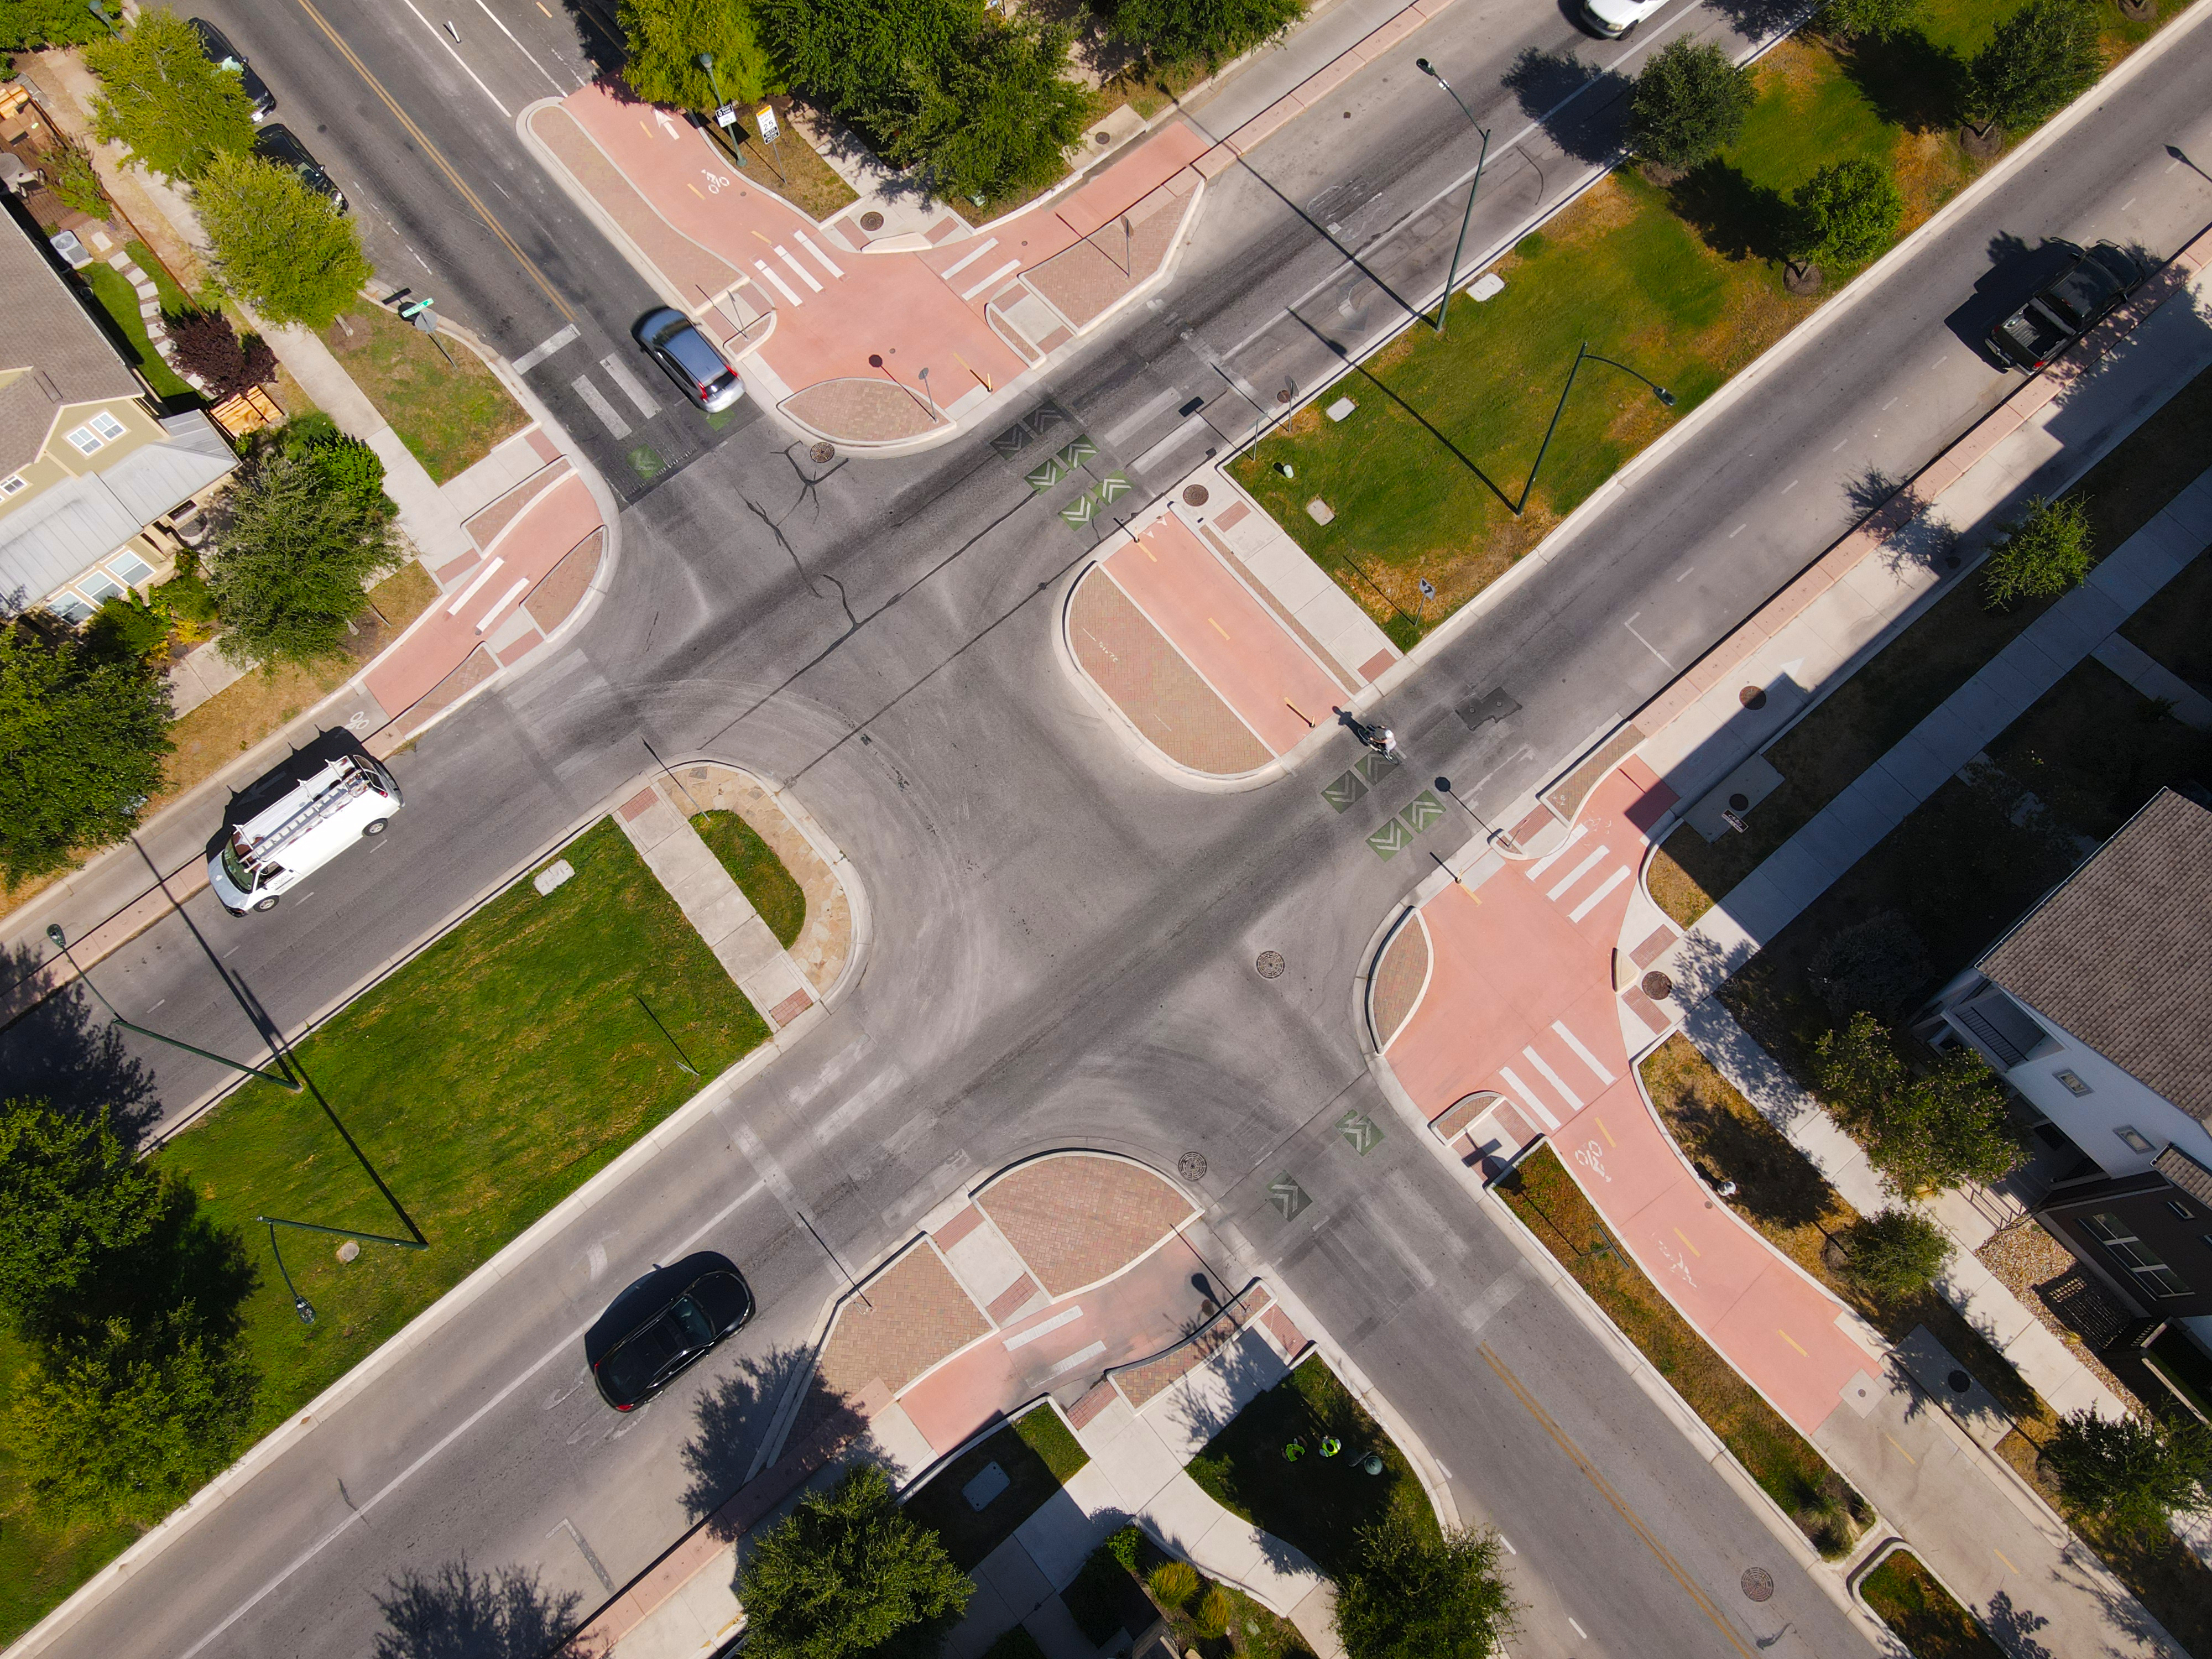 Aerial view of intersection improvements made at Berkman Drive and Zach Scott Street.